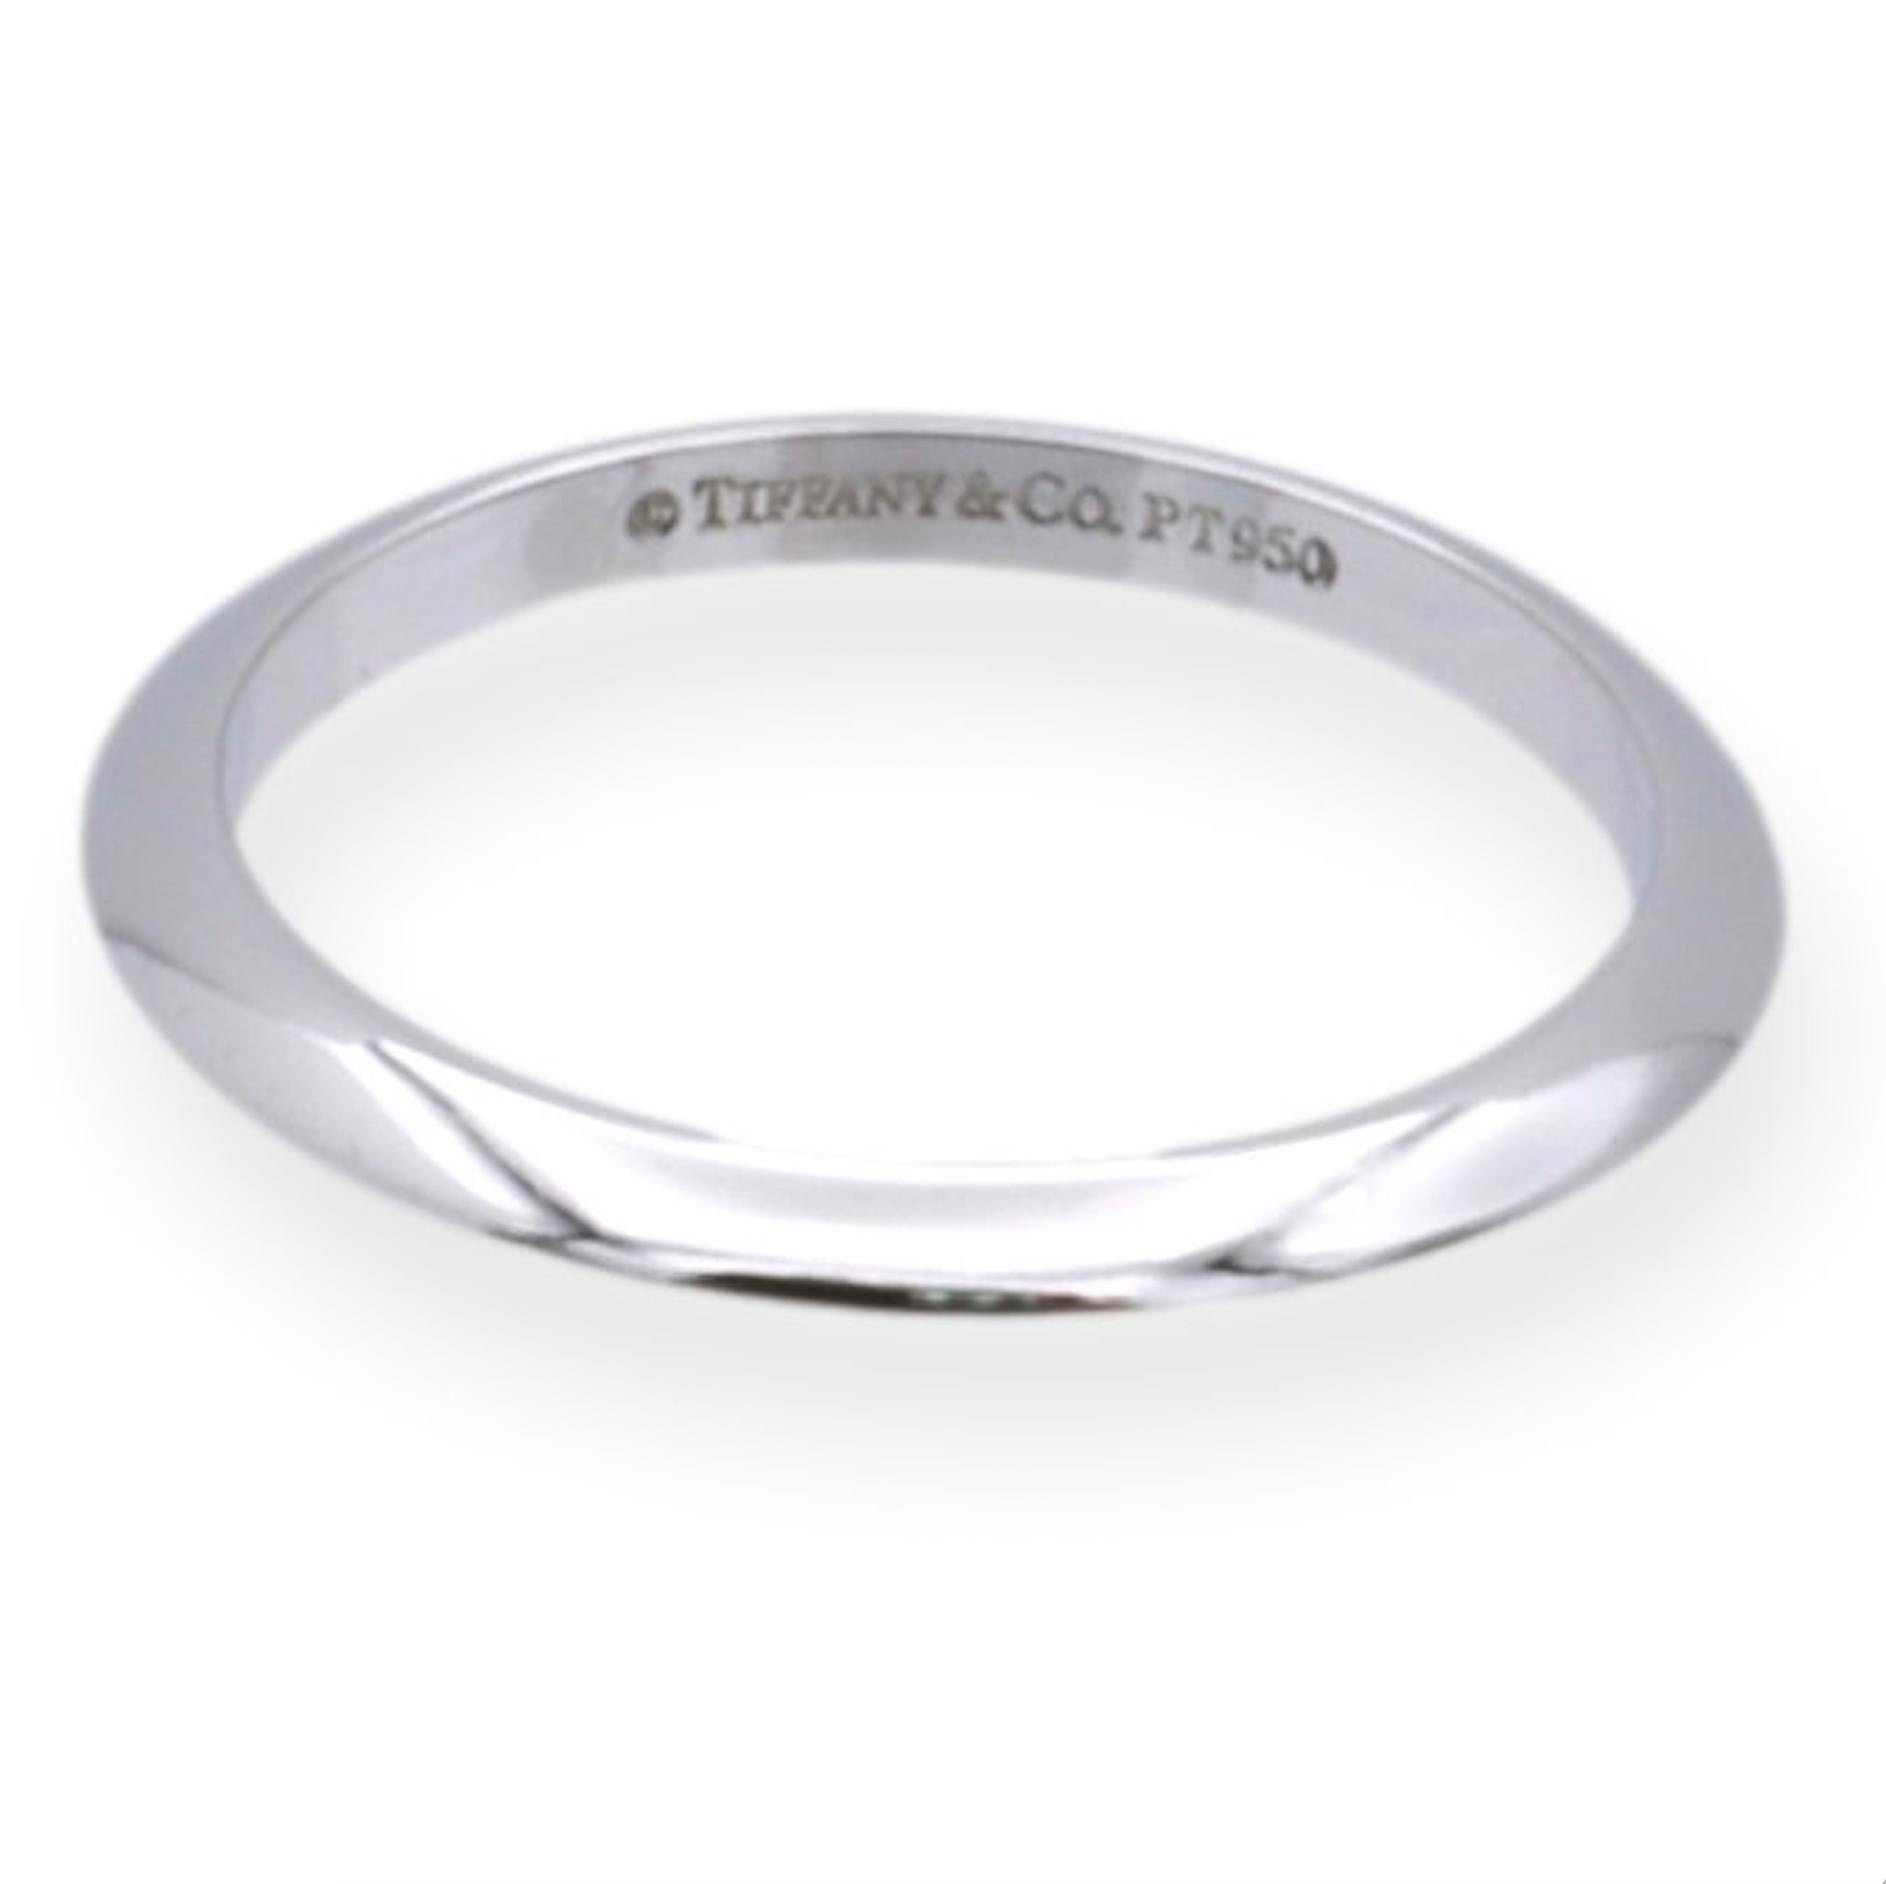 Tiffany & Co. Platinum 2mm Knife-Edge wedding band ring finely crafted in platinum.
Complements any Tiffany solitaire engagement ring. Fully hallmarked with logo and metal content. 

Ring Specifications
Brand: Tiffany & Co. 
Style: